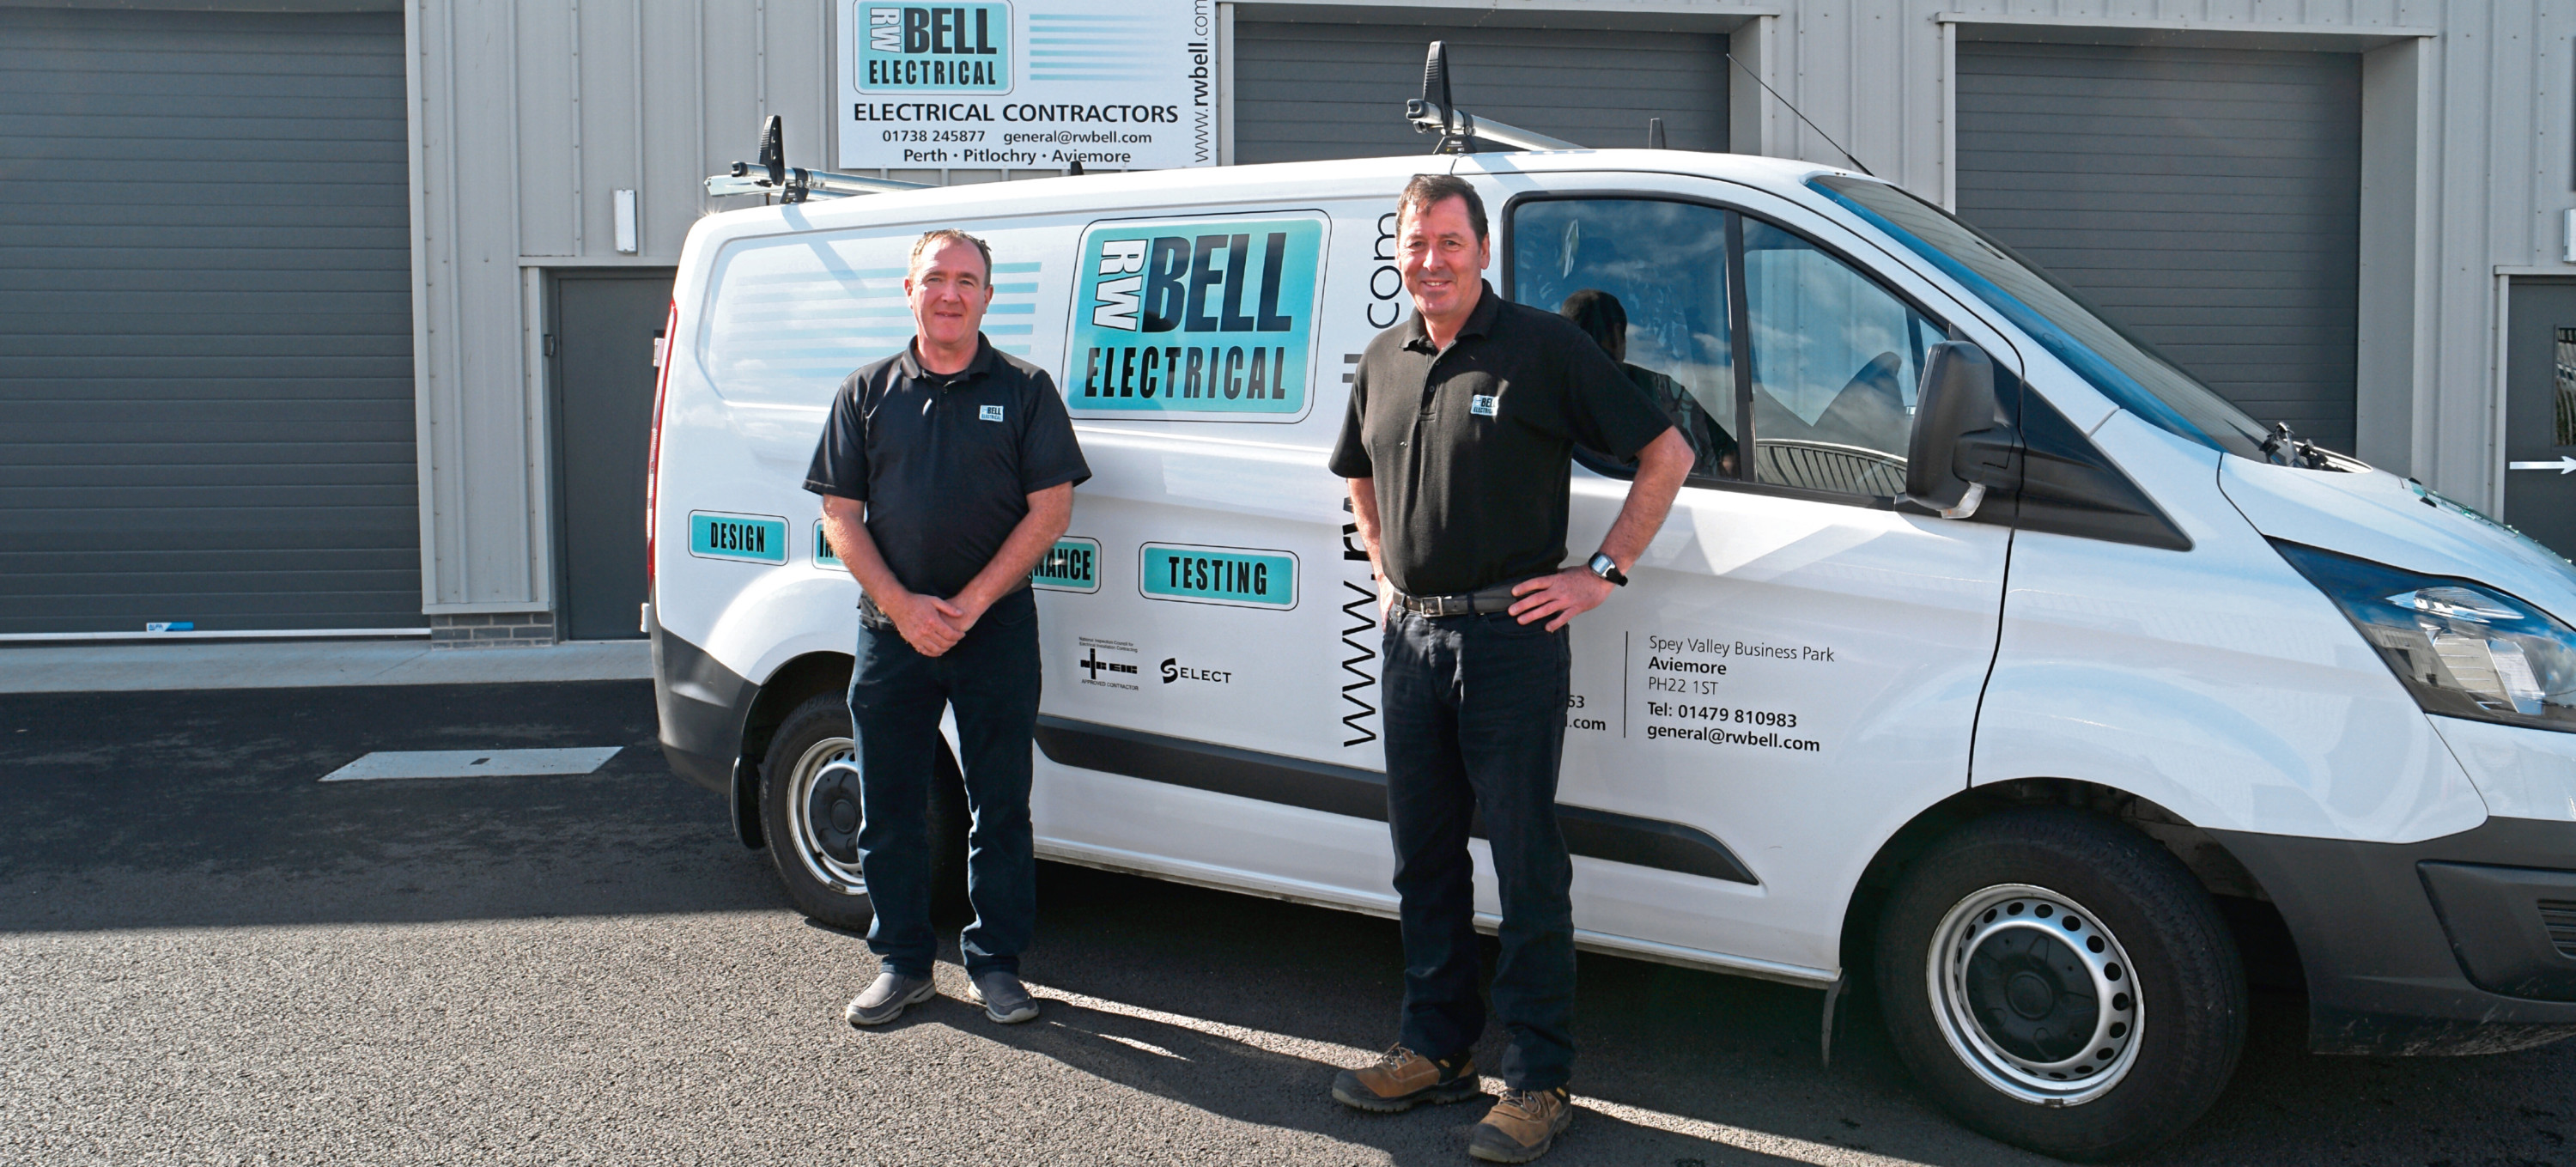 From left, Alan Smith and Bruce Cuthill will lead the new  RW Bell Electrical depot in Perth.